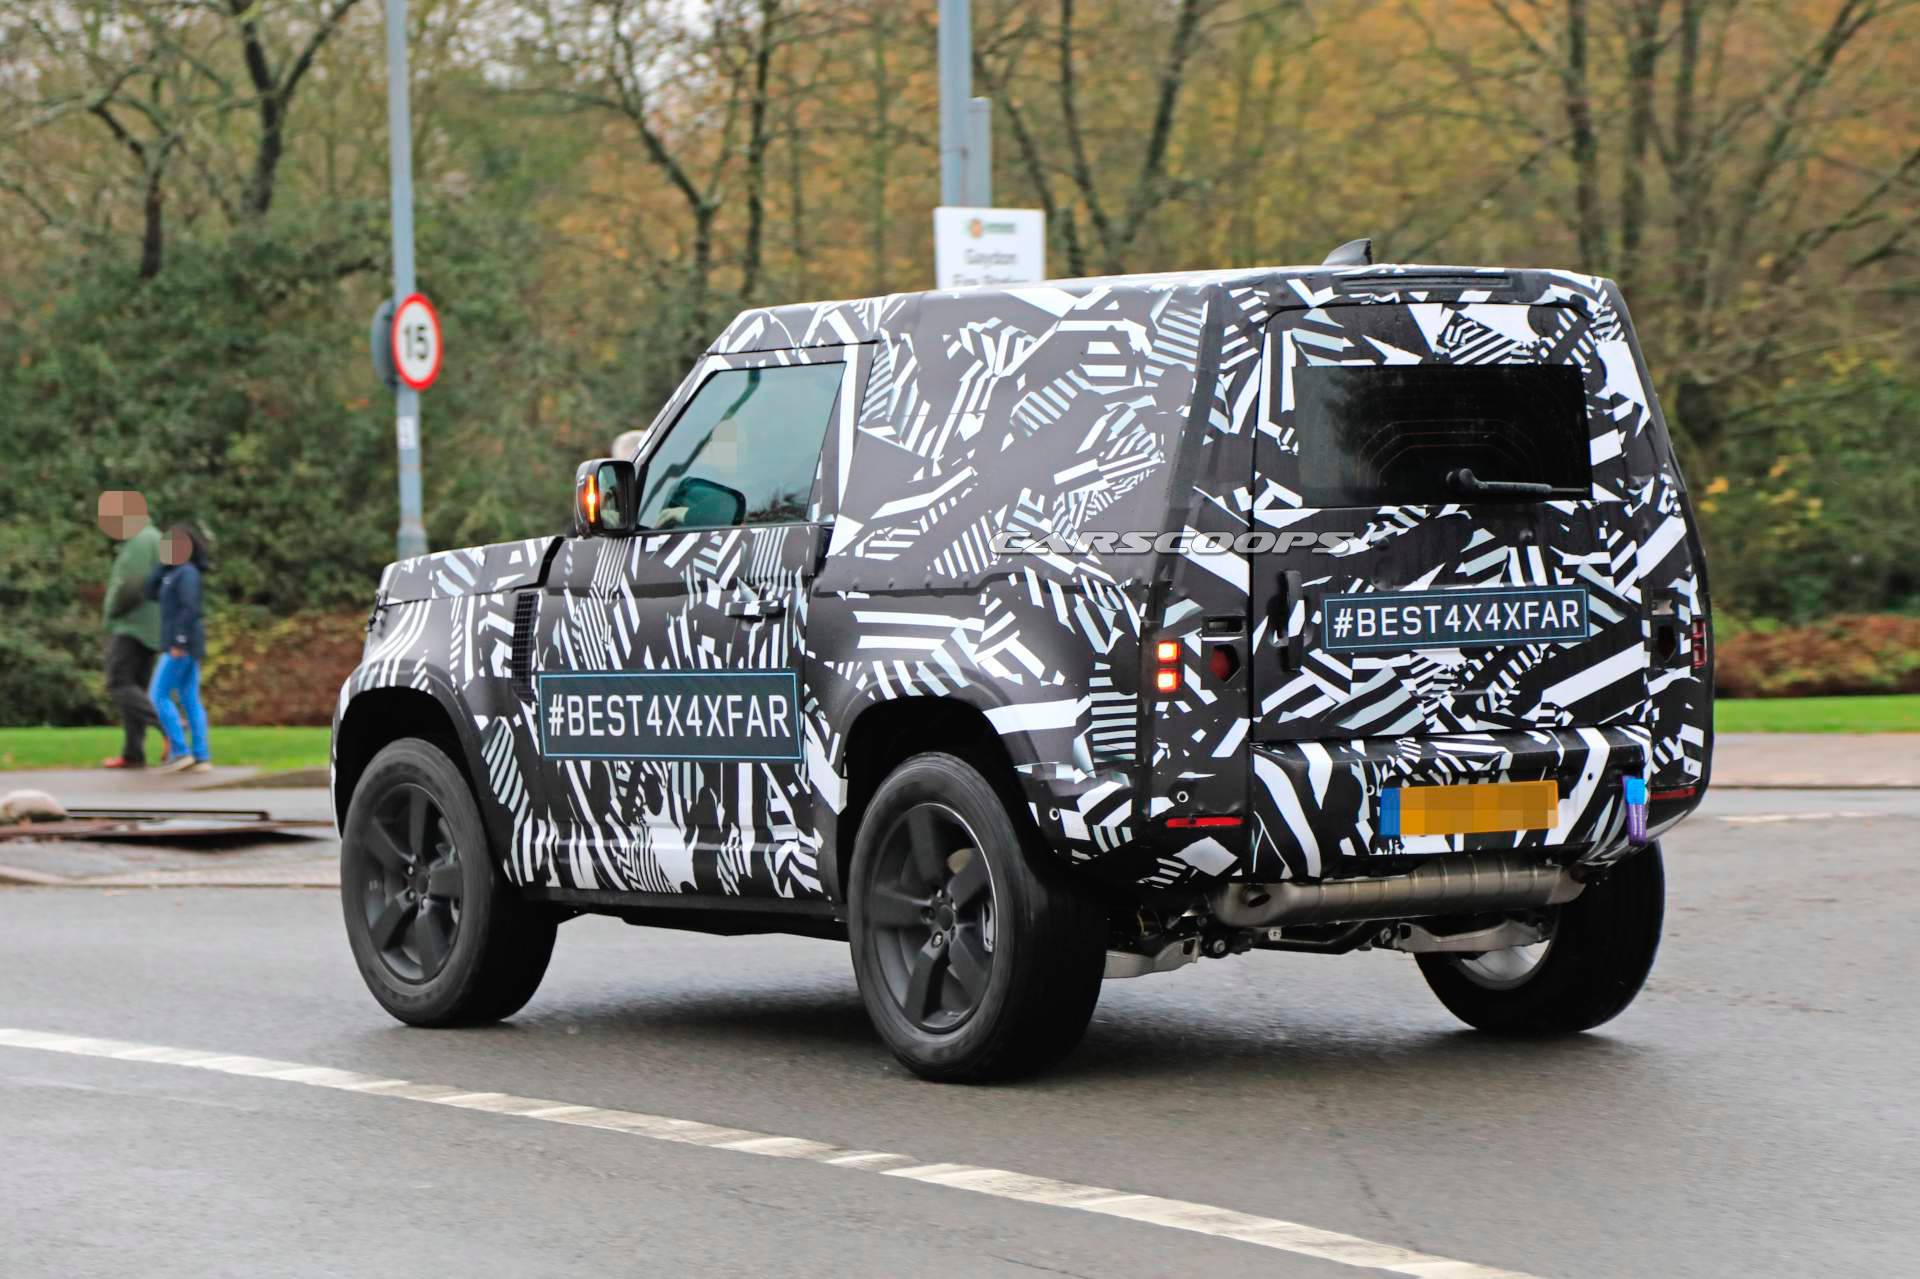 2020 Land Rover Defender 90 With 3 Doors And Swb Will Be The Most